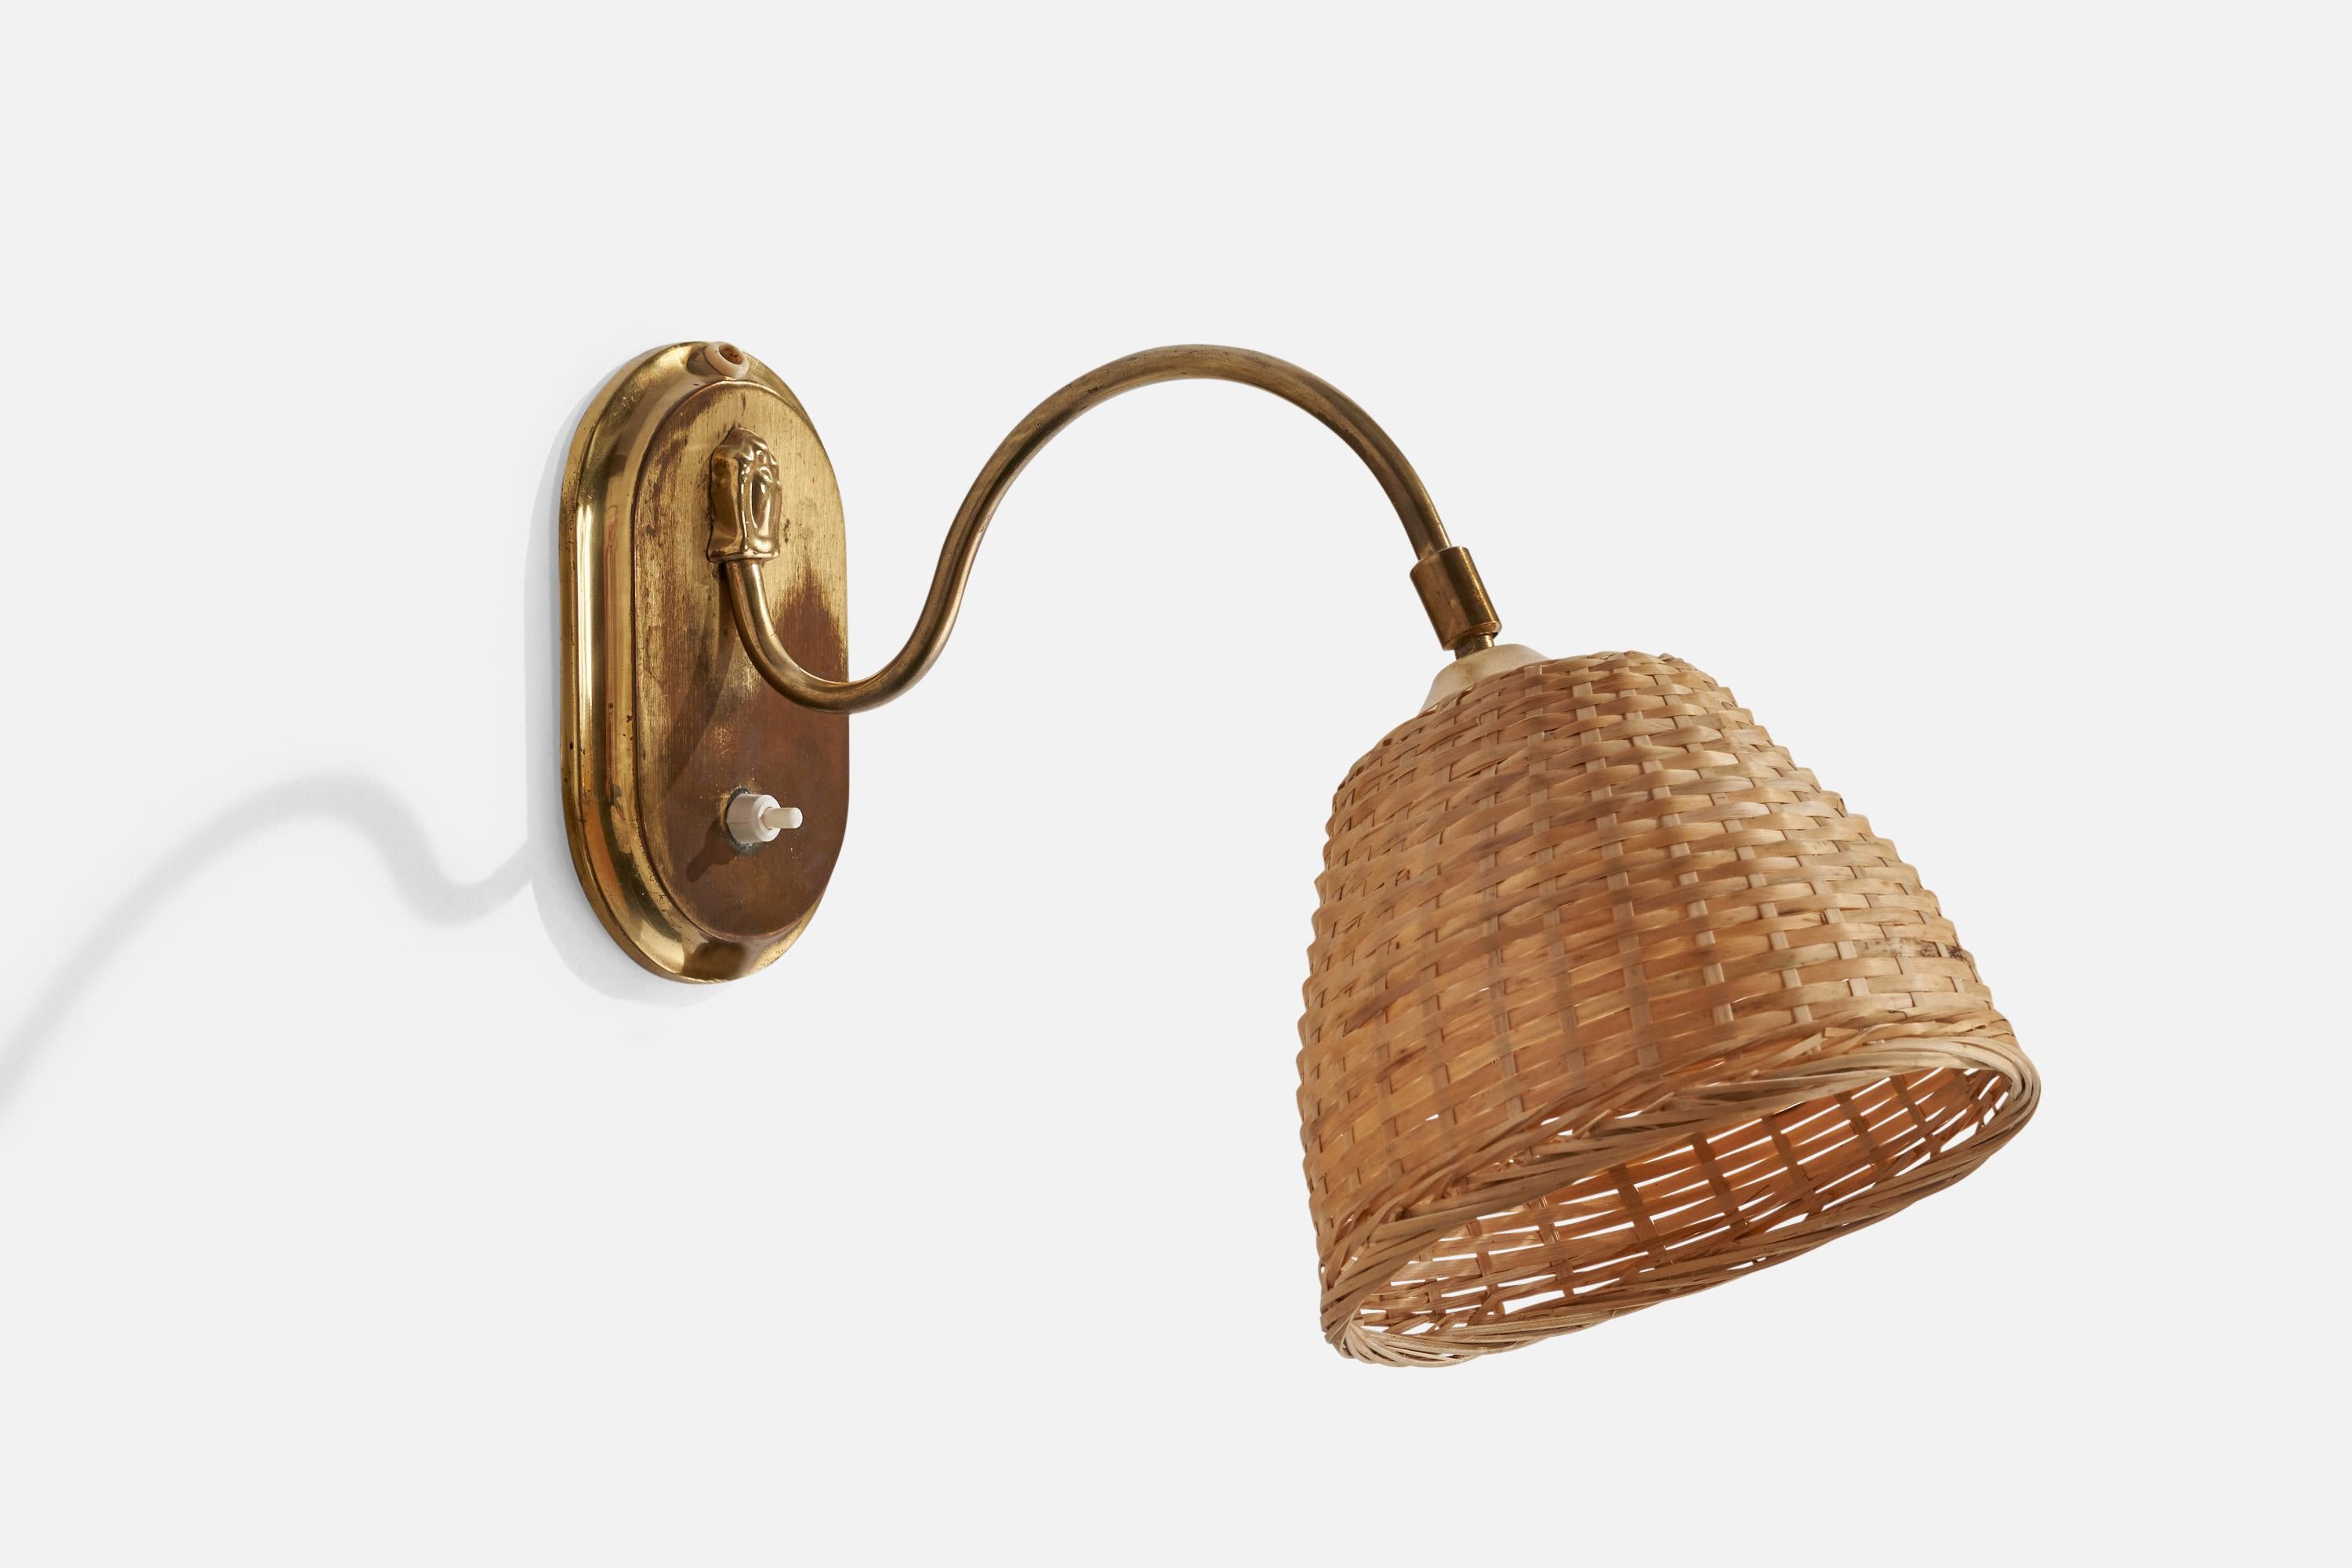 An adjustable brass and rattan wall light designed and produced by AJH, Sweden, 1940s.

Overall Dimensions (inches): 6.5”  H x 7”  W x 14.75” D
Back Plate Dimensions (inches): 6.5” H x 4.25” W x .75”  D
Bulb Specifications: E-26 Bulb
Number of